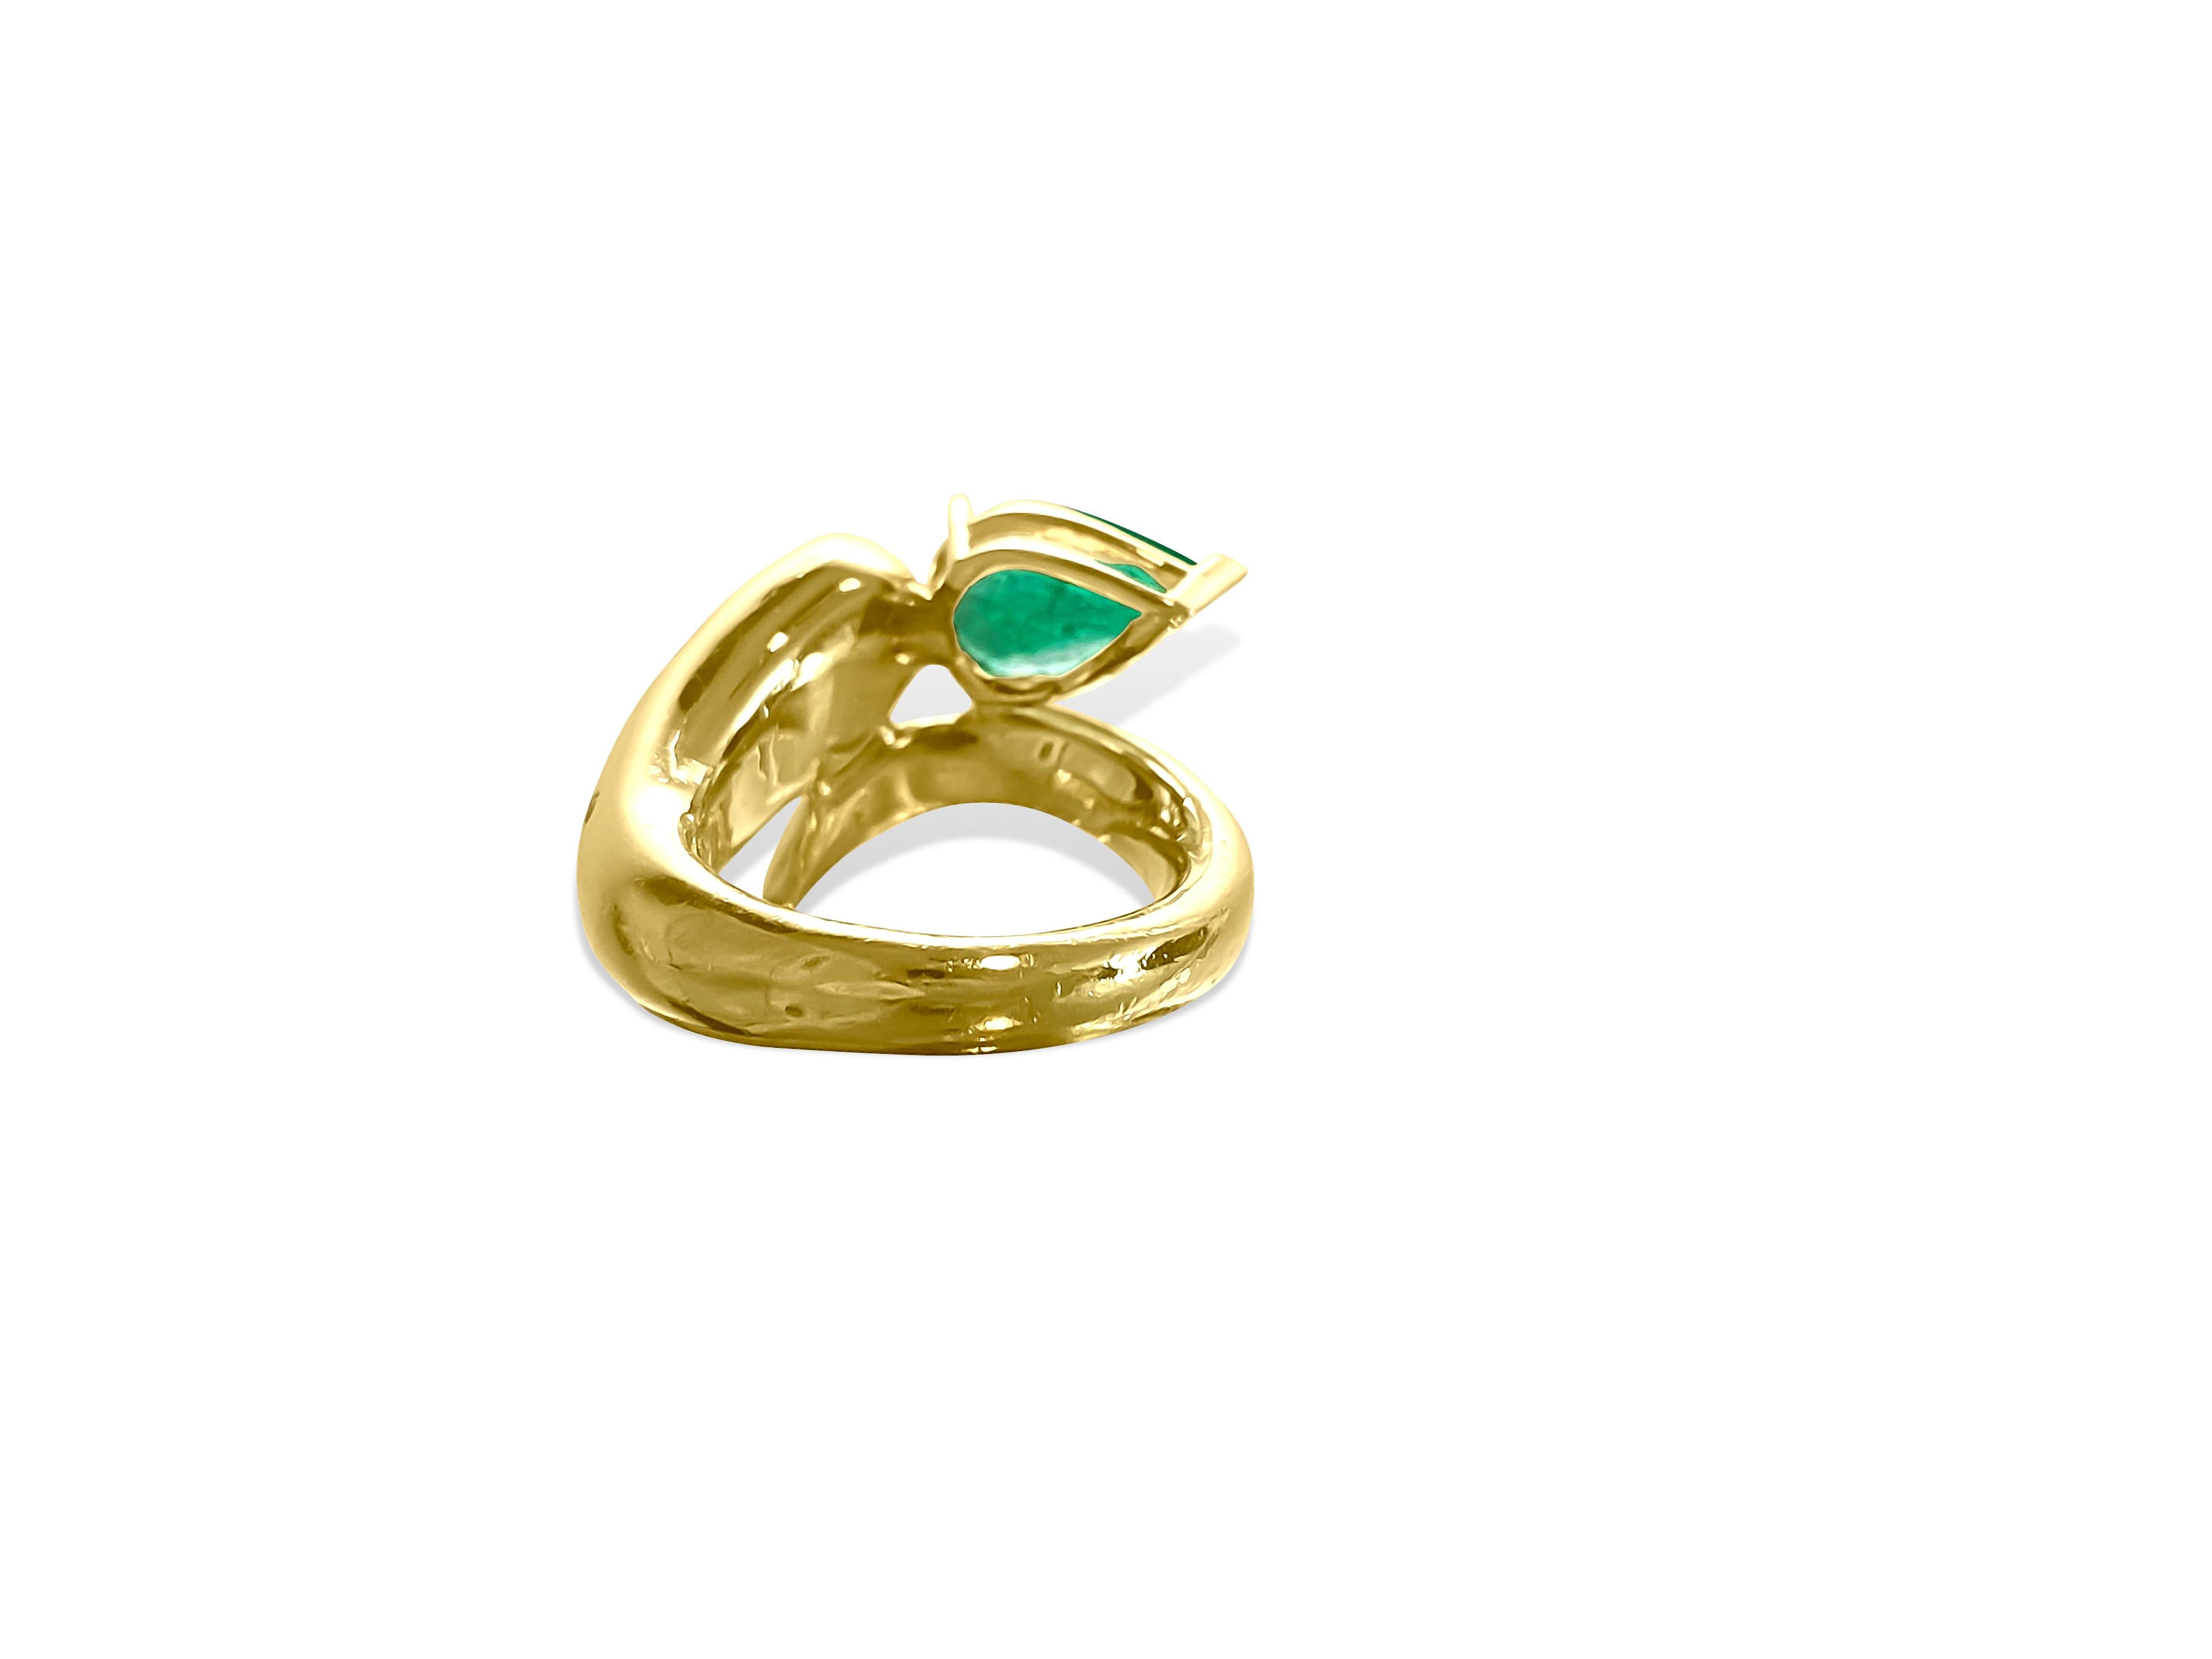 Indulge in luxurious 18k yellow gold, this vintage ring by Faraone Mennella showcases a breathtaking 2.00ct pear-shaped Colombian emerald, exuding natural beauty and elegance. Adorned with sparkling round brilliant cut diamonds totaling 0.35 carats,